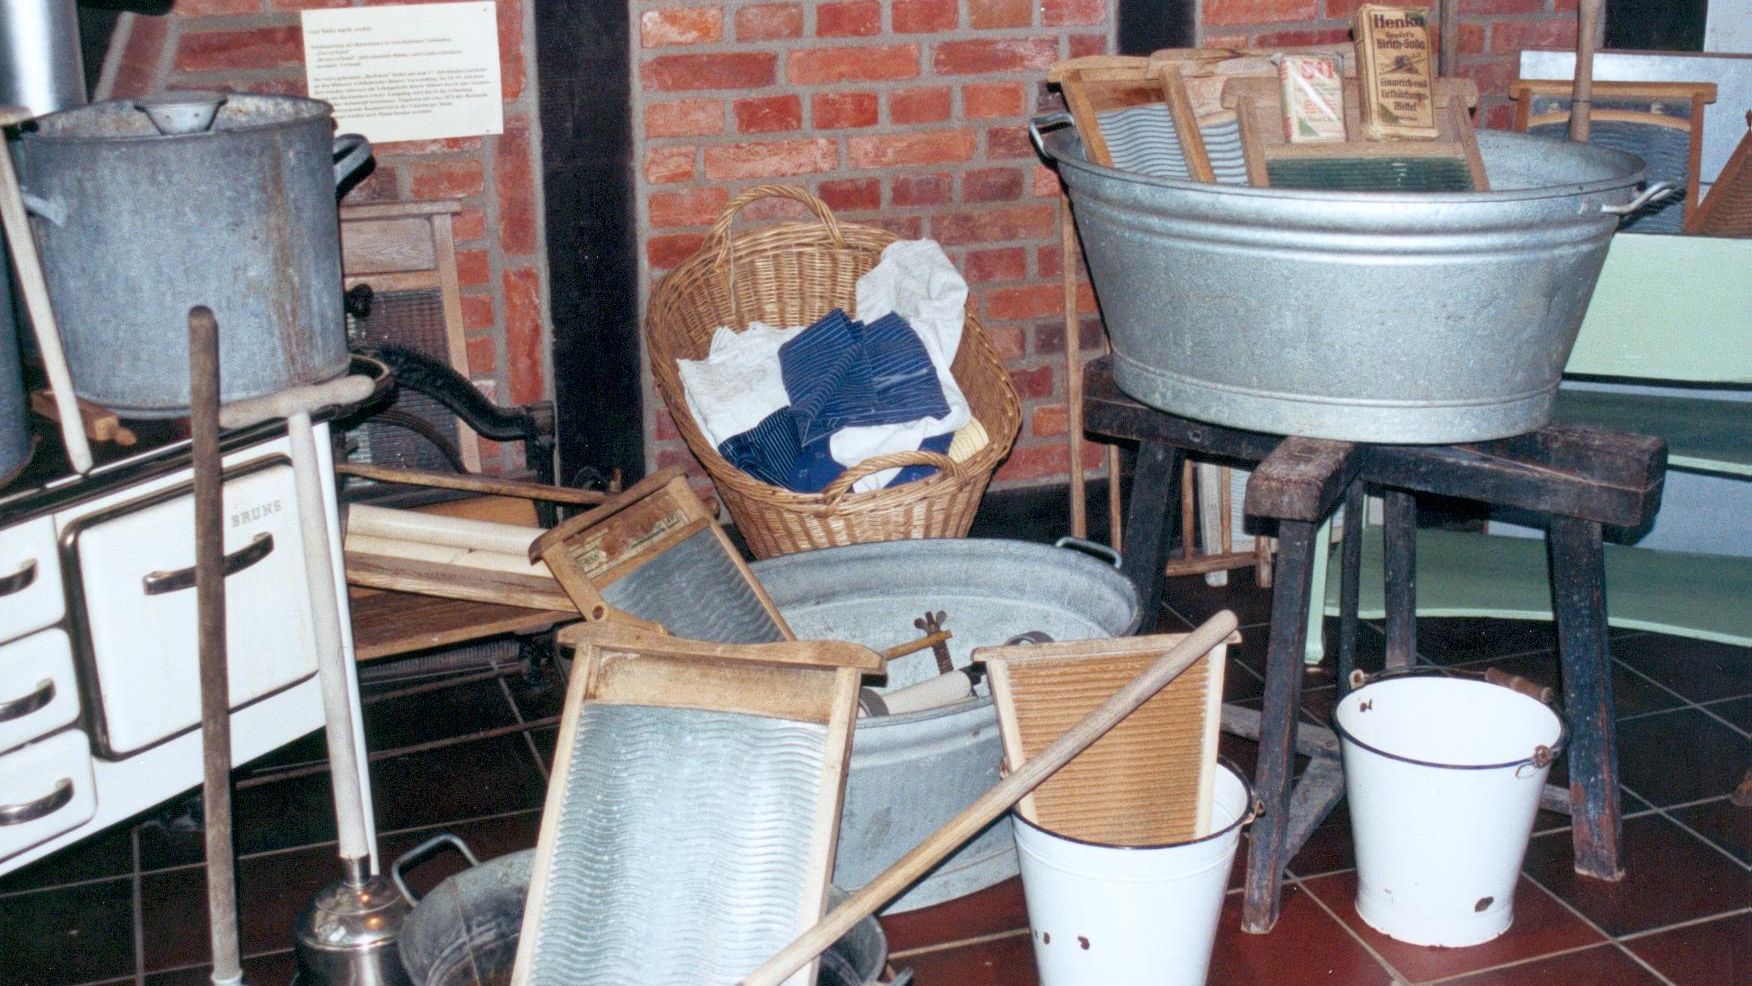 Laundry tub in the Museum of Home in Hermannsburg